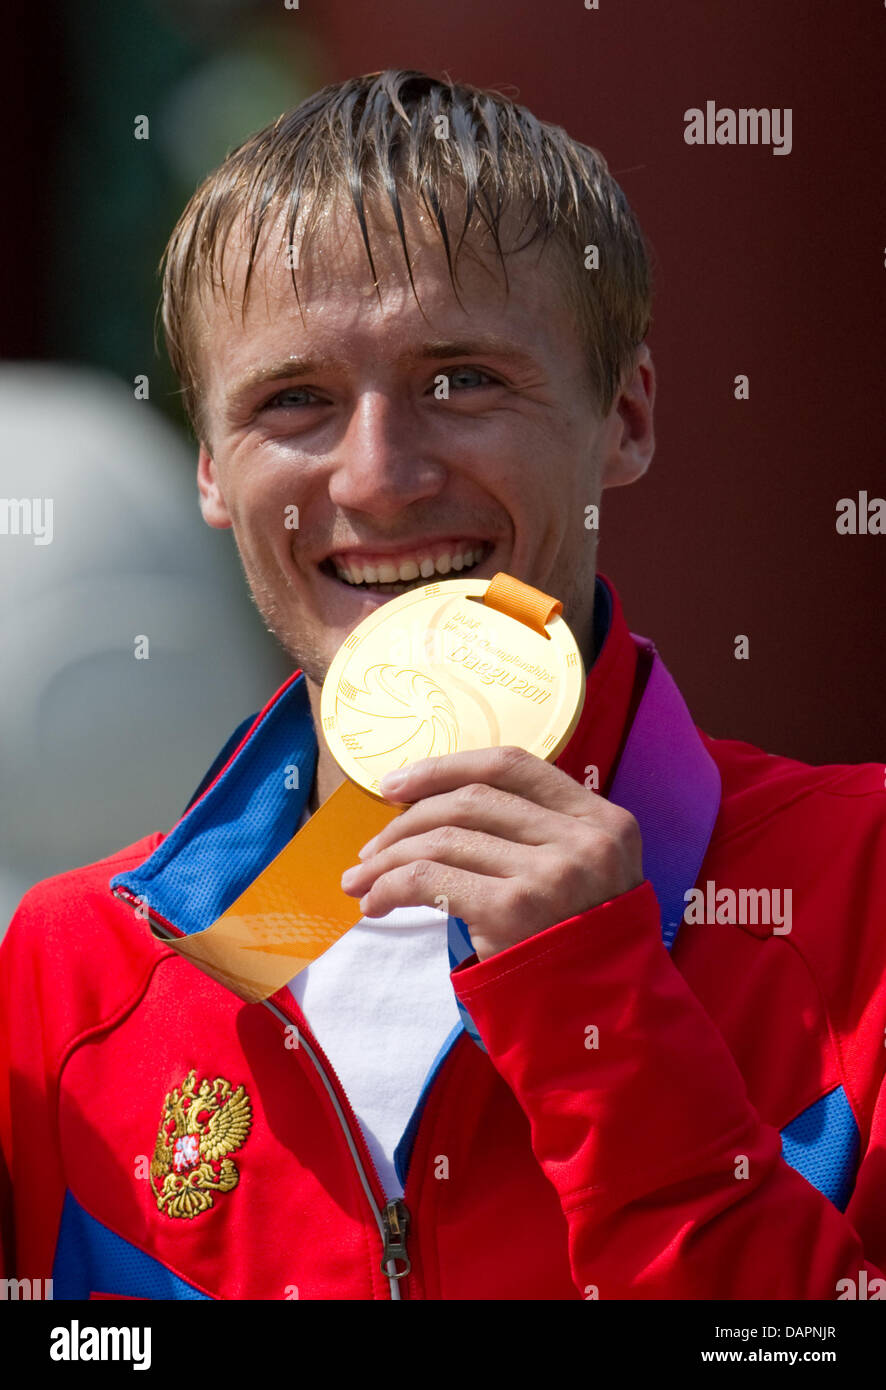 Winner Valeriy Borchin of Russia shows his gold medal for finishing first place in the Men 20 Kilometres Race Walk of the 13th IAAF World Championships in Daegu, Republic of Korea, 28 August 2011. Kanaykin ranked second. Photo: Bernd Thissen dpa Stock Photo